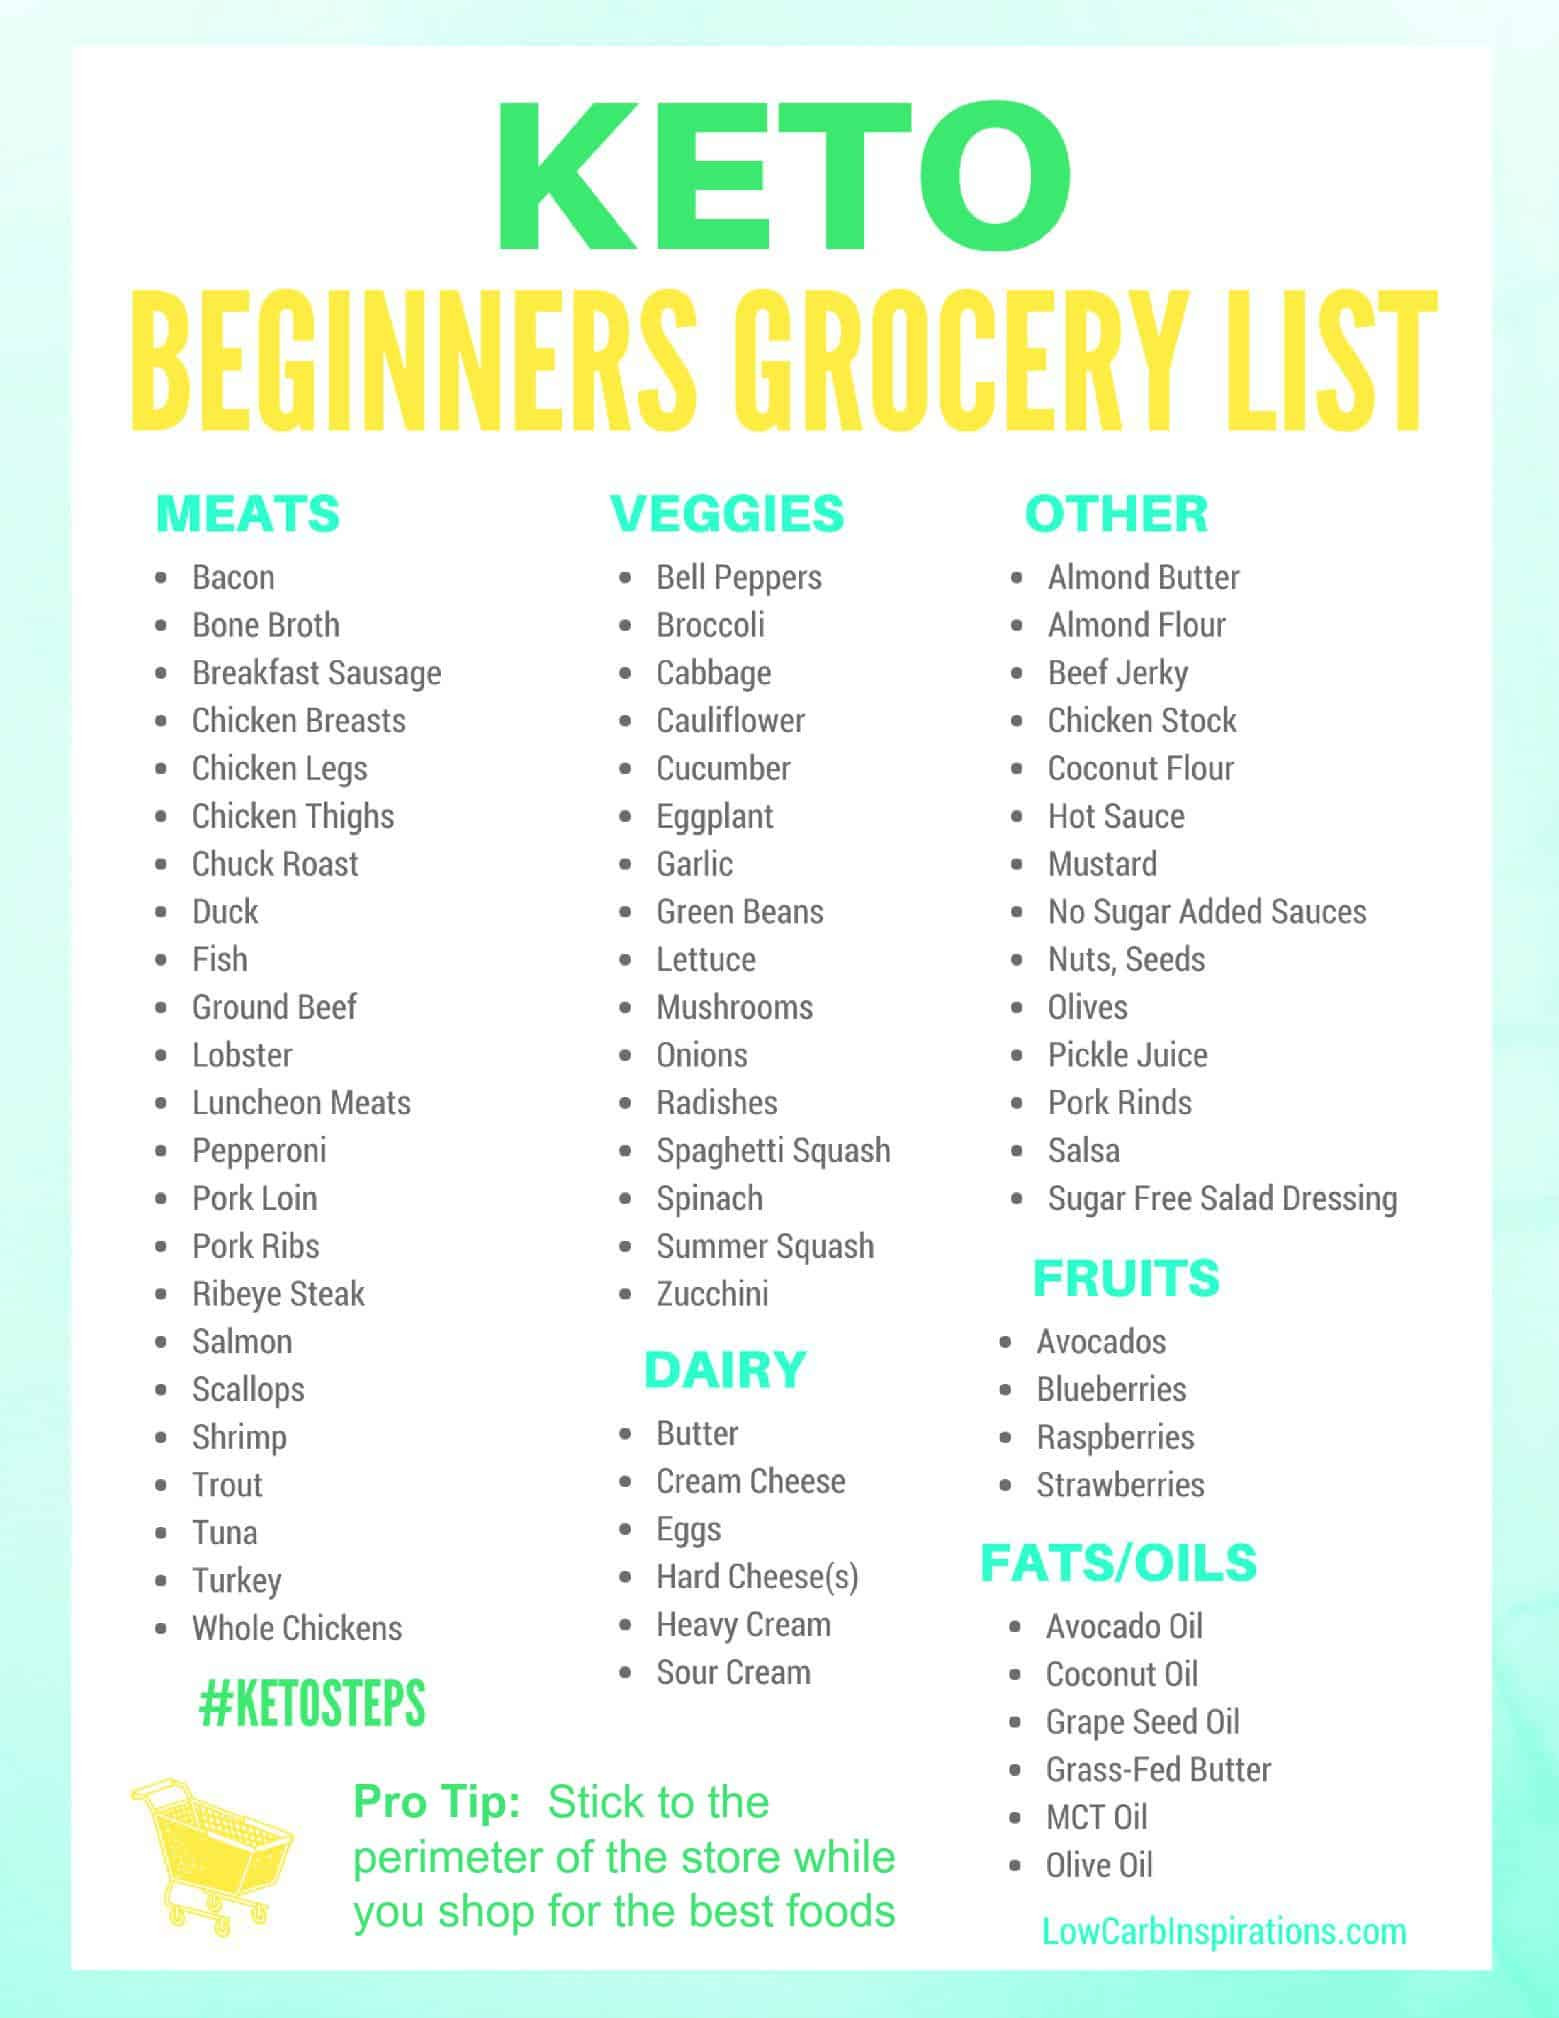 Keto For Beginners Food Lists
 Keto Grocery List for Beginners iSaveA2Z